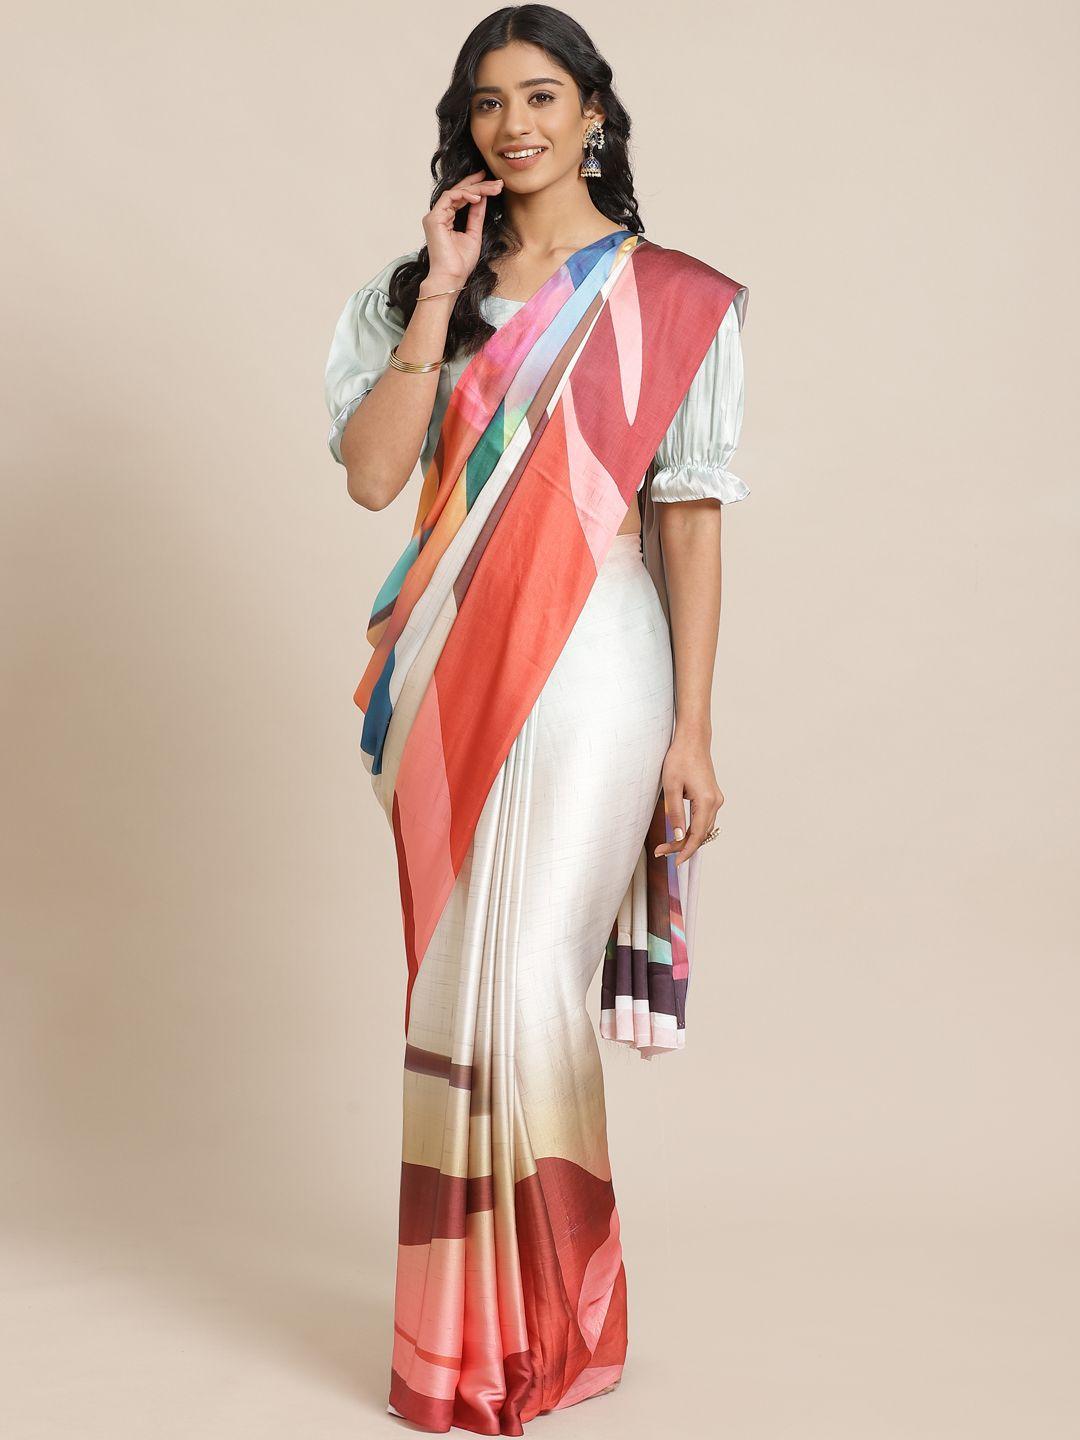 saree mall off-white & red printed saree with satin finish